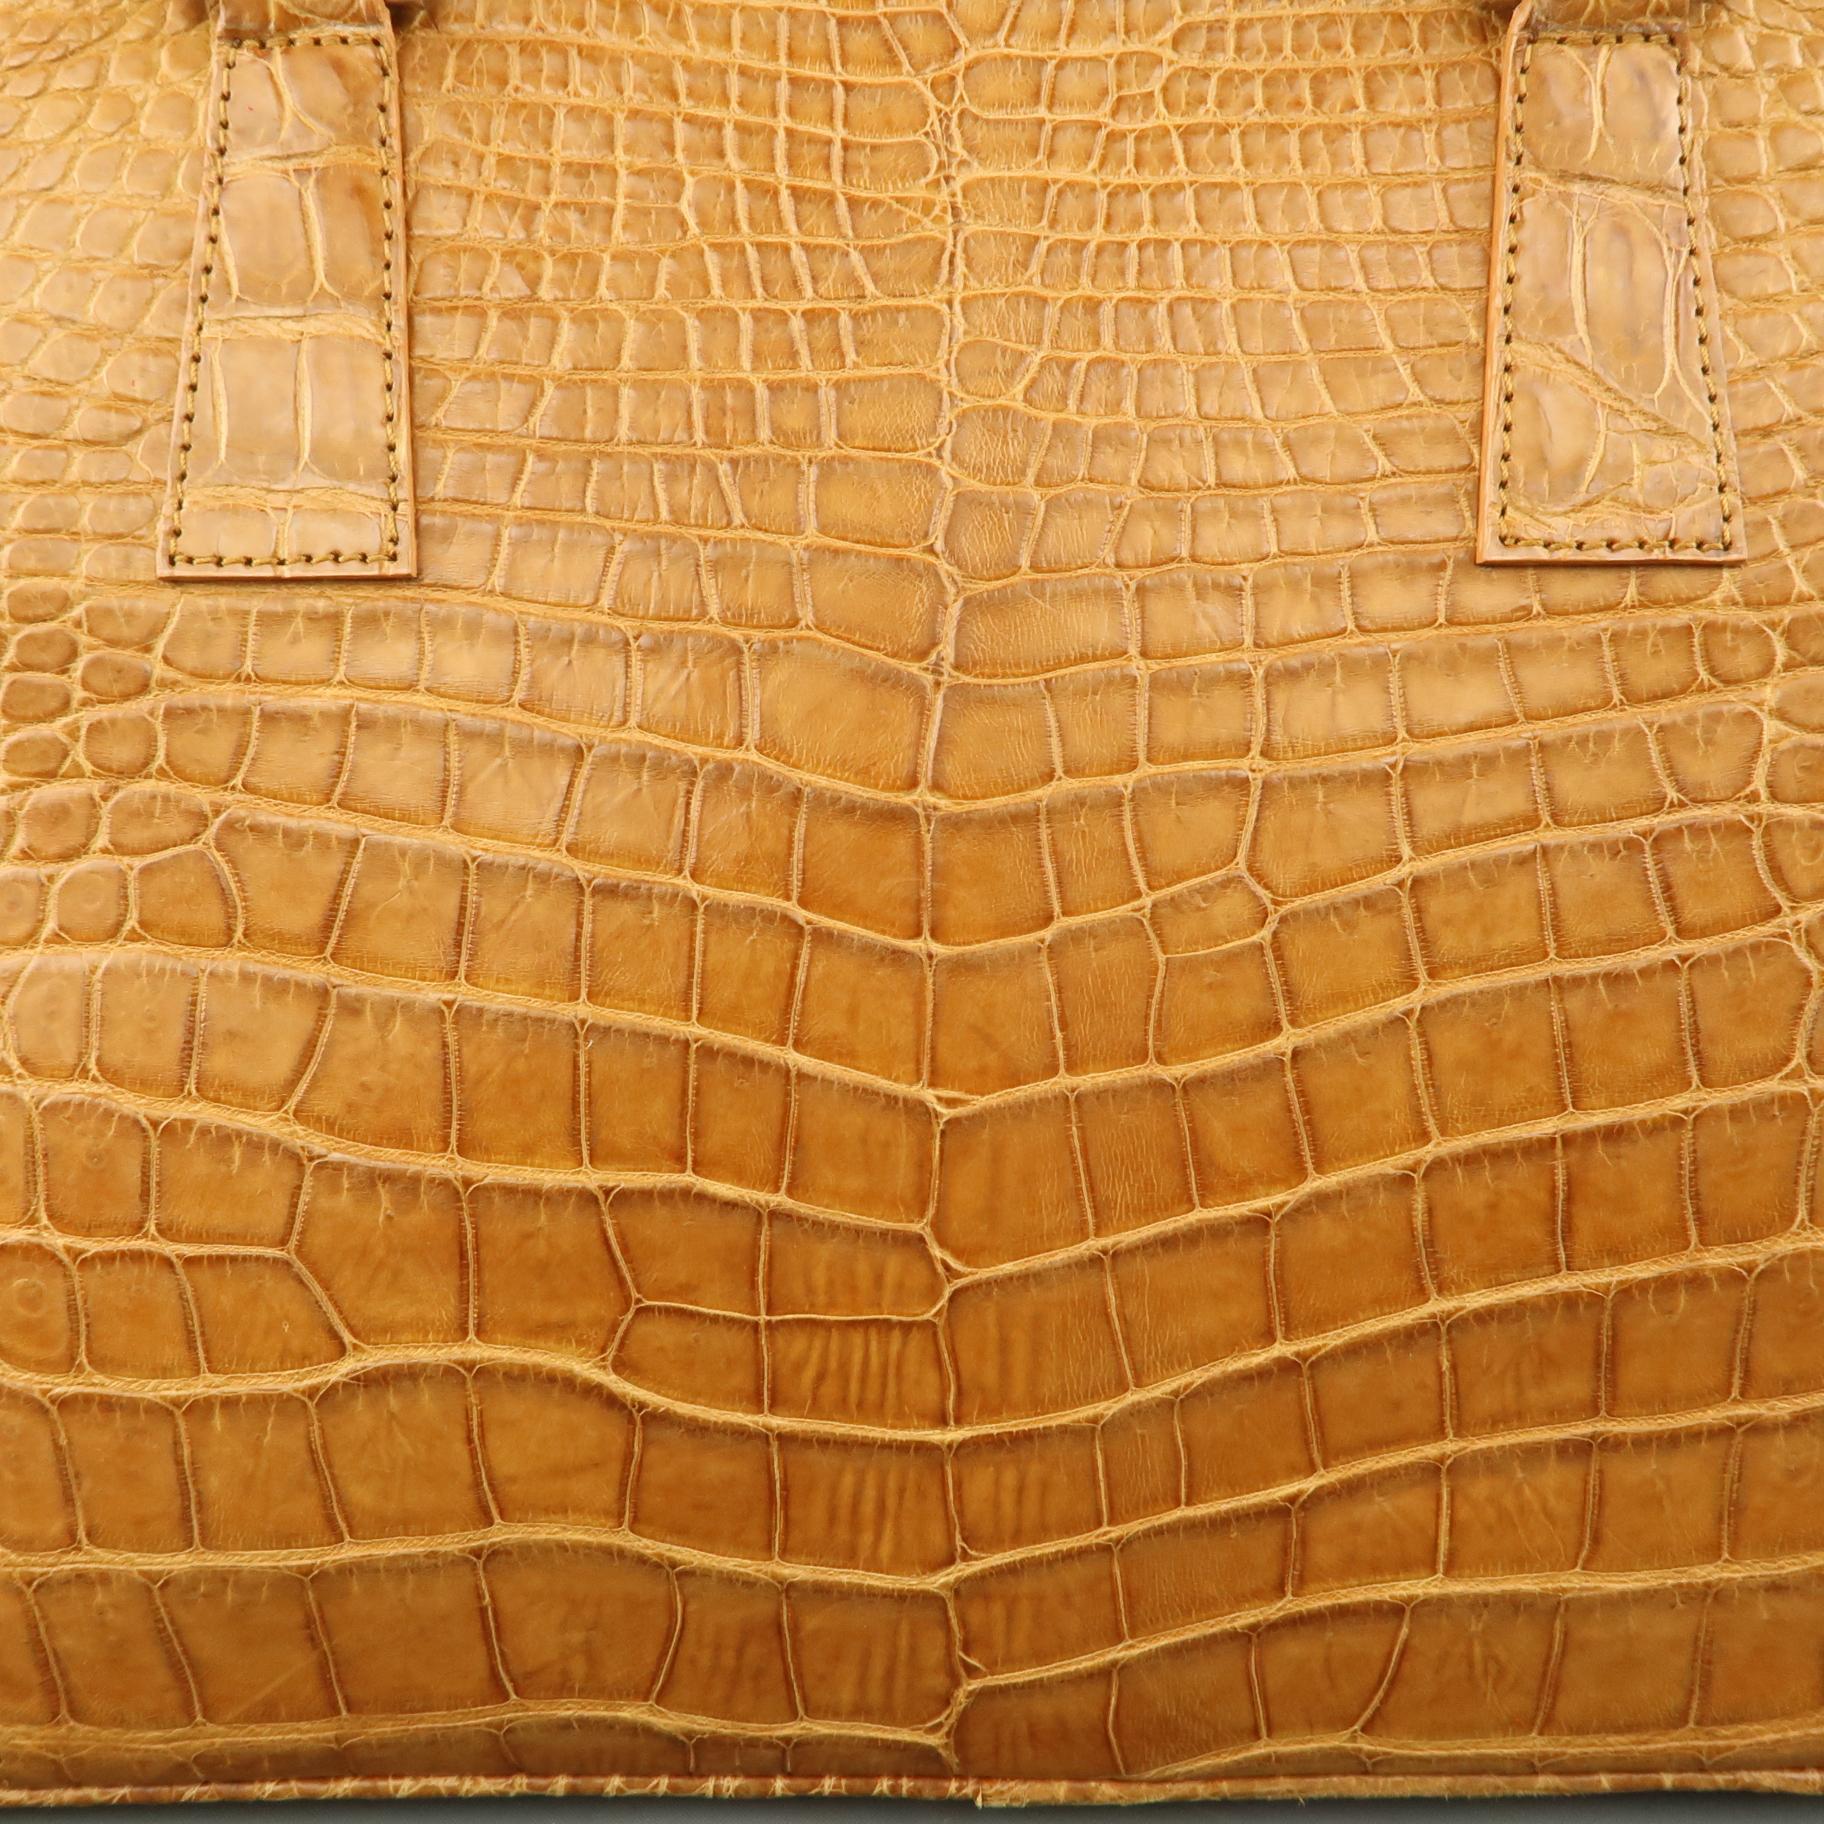 LK LEATHER BANGKOK handbag comes in genuine tan crocodile leather leather with double rolled top handles, silver tone hardware, top zip closure, and suede interior.
 
Excellent Pre-Owned Condition.
 
Measurements:
 
Length: 14.5  in.
Width: 4.5